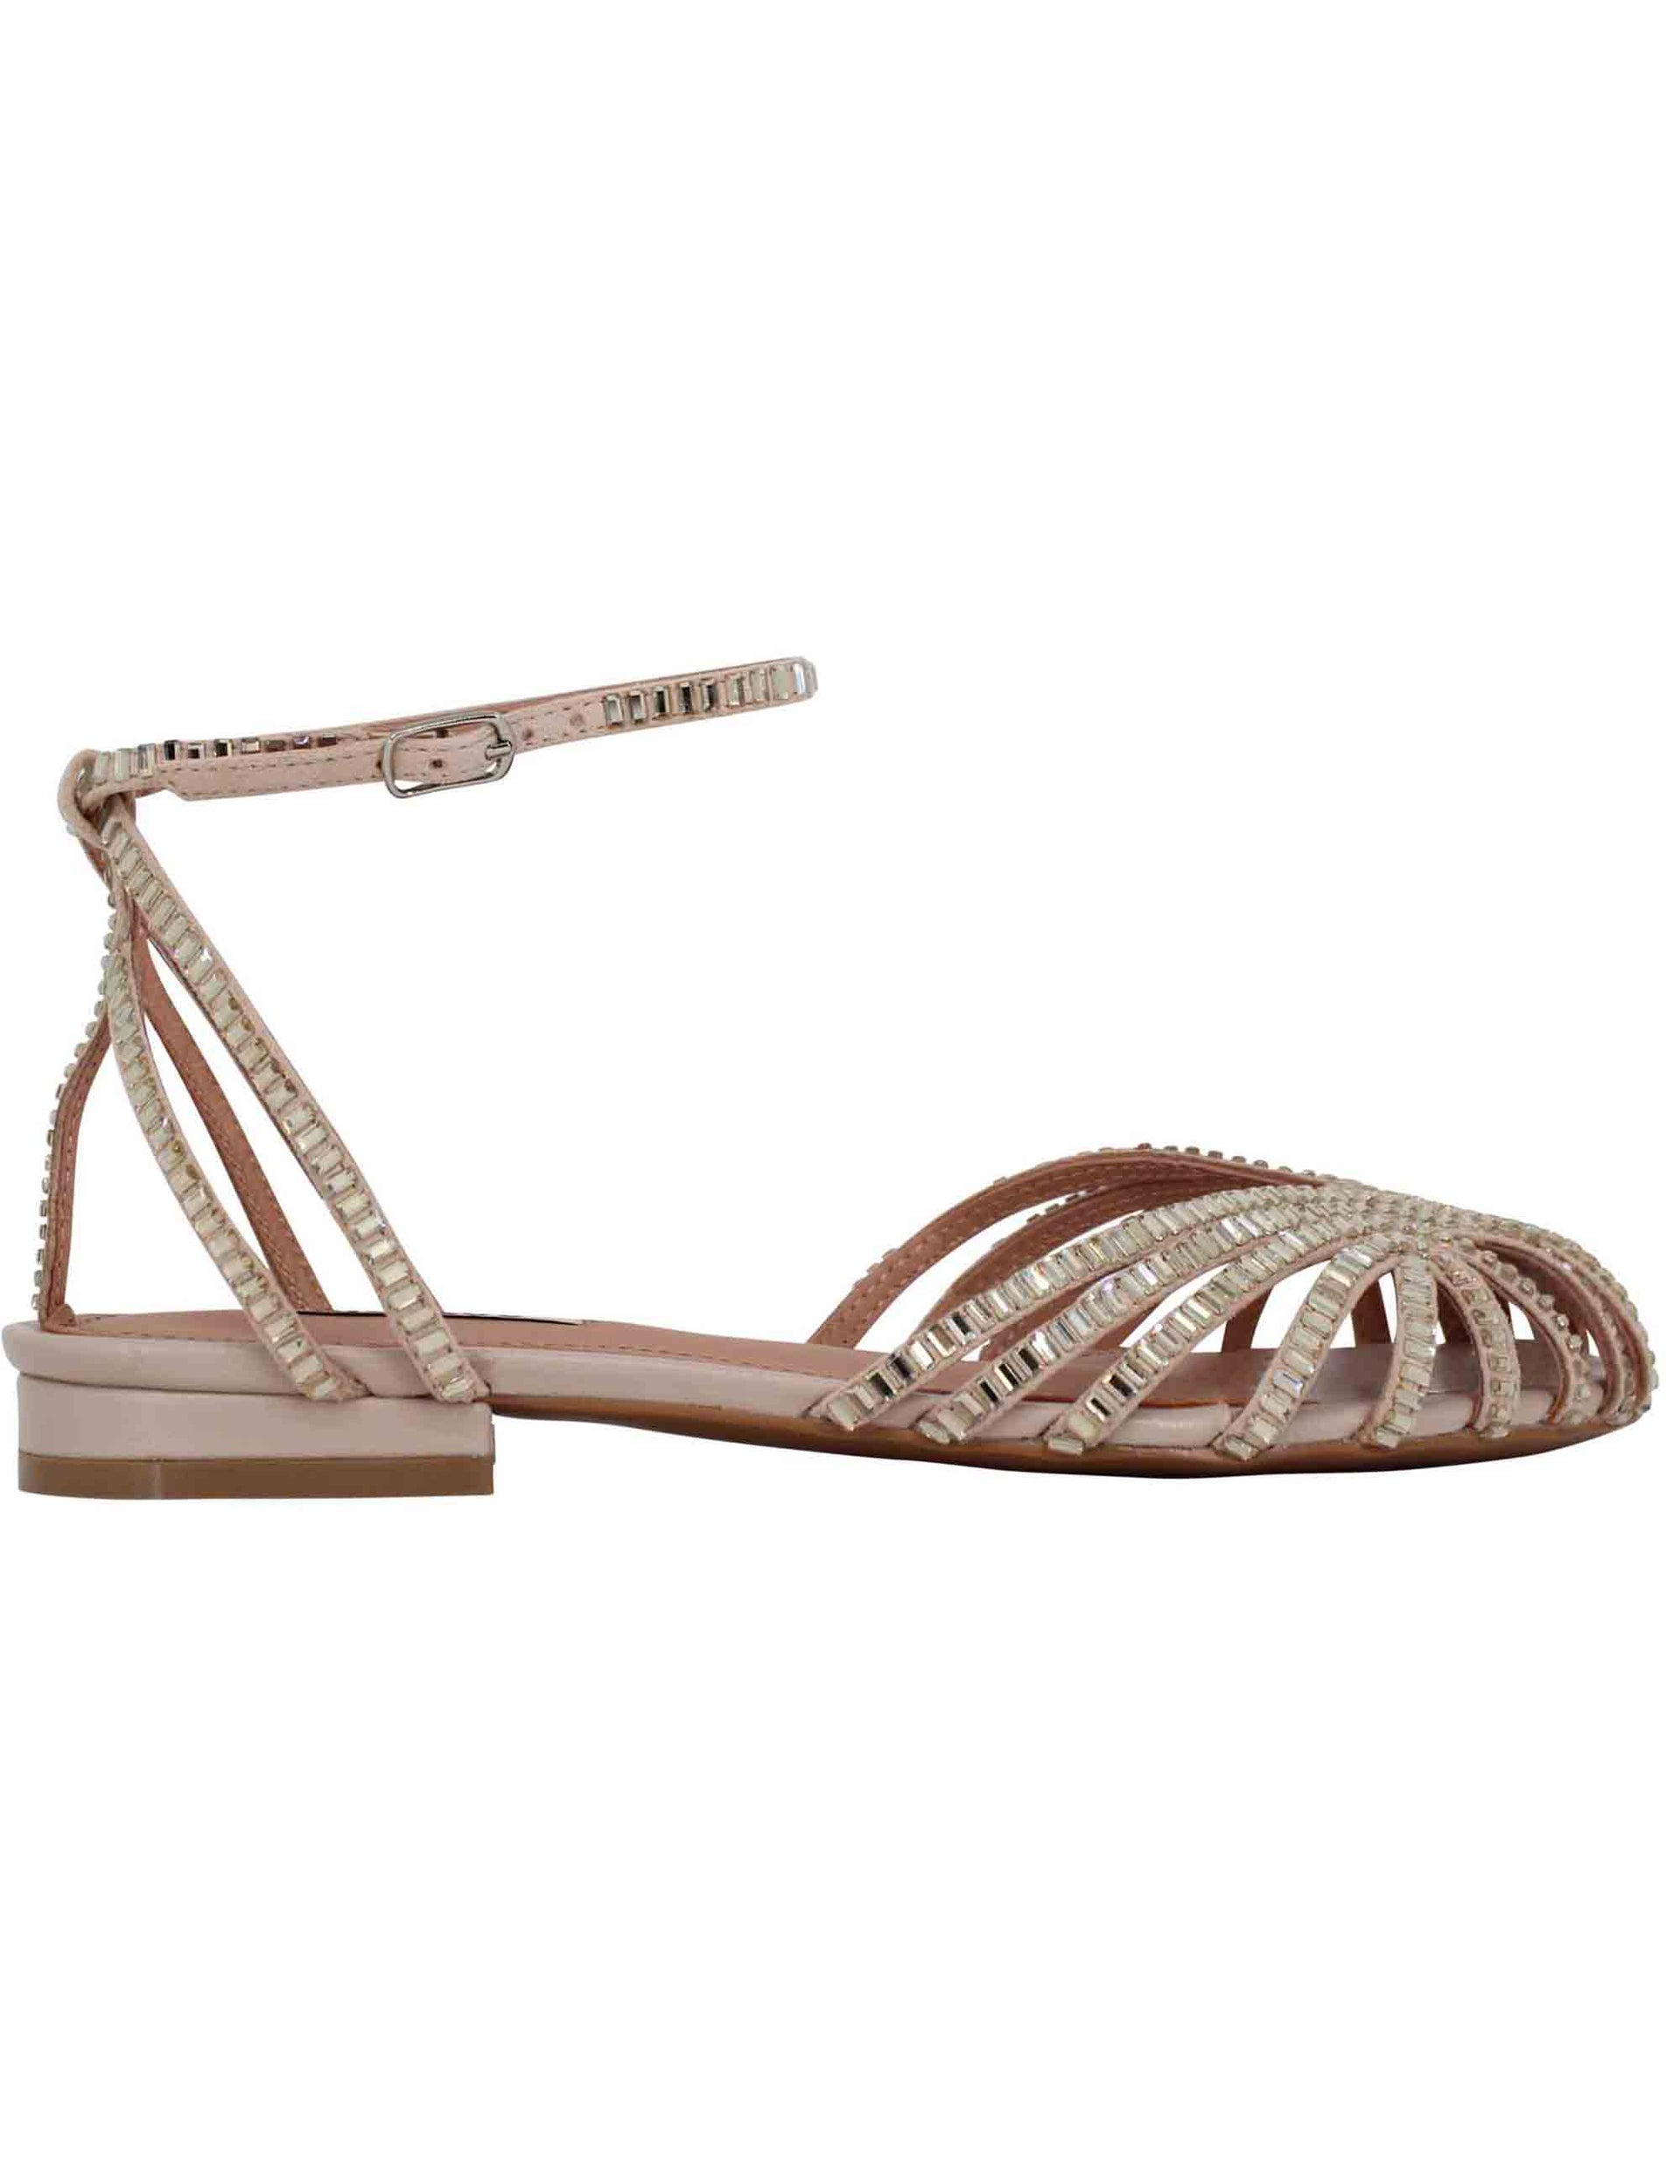 Serabi women's flat sandals in nude suede with rhinestones and ankle strap